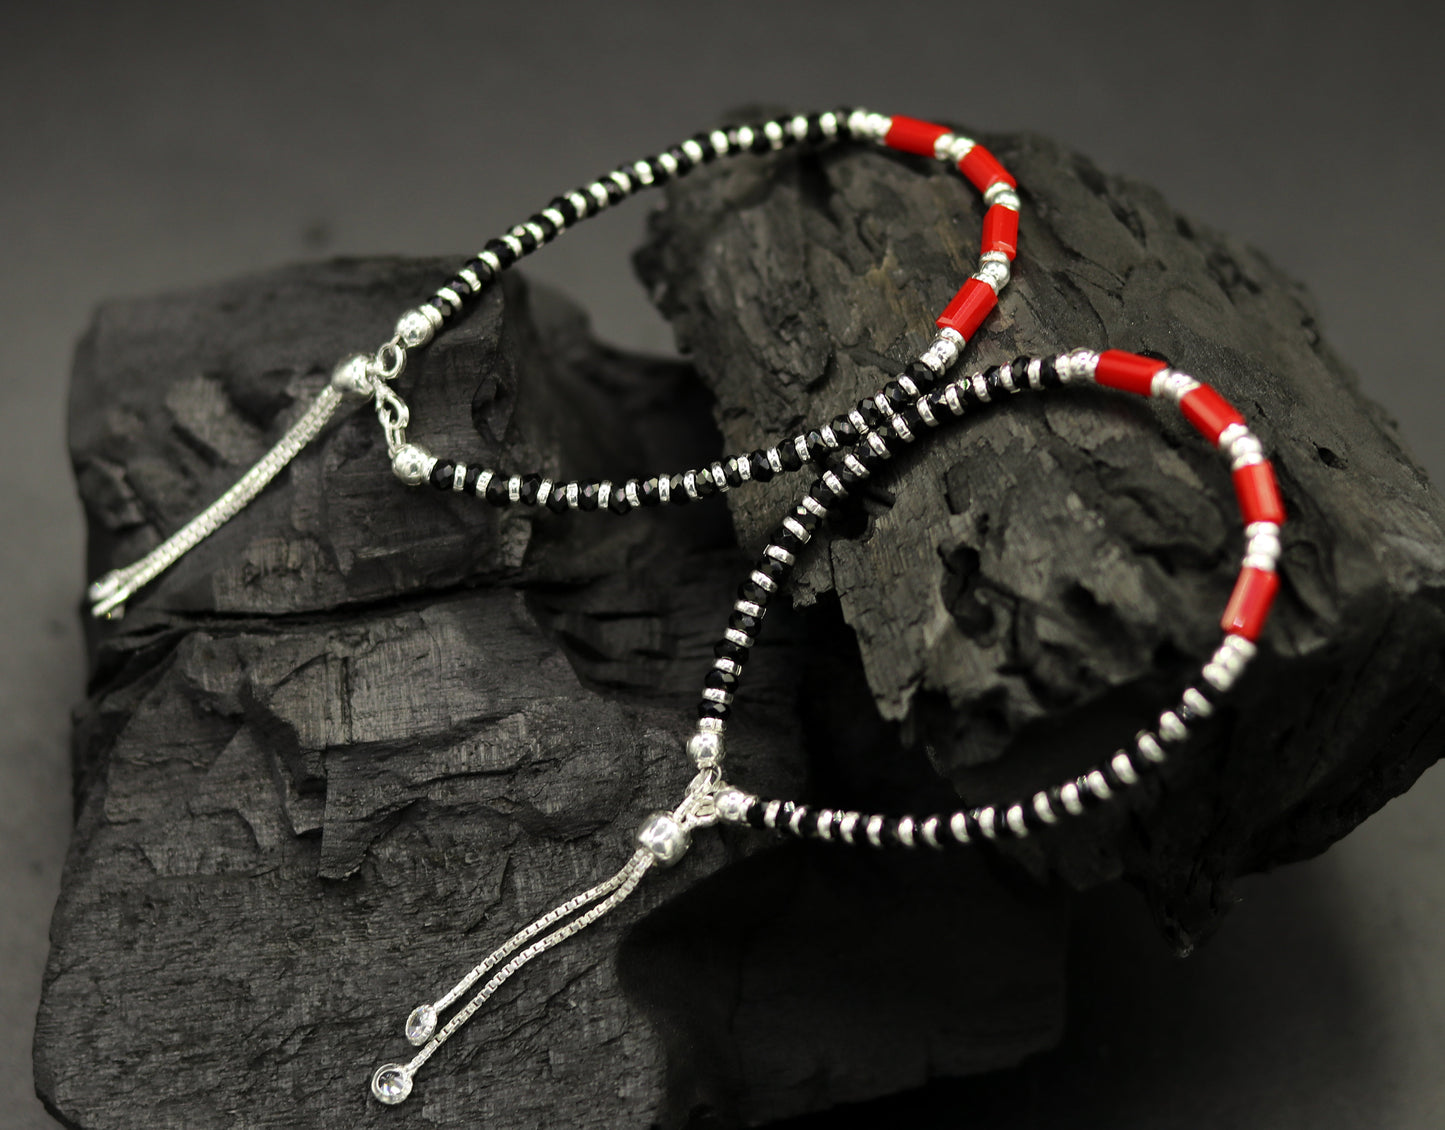 7 inches long handmade 925 sterling silver fabulous silver beads, red and black stone charm adjustable customized bracelet for girl's sbr169 - TRIBAL ORNAMENTS